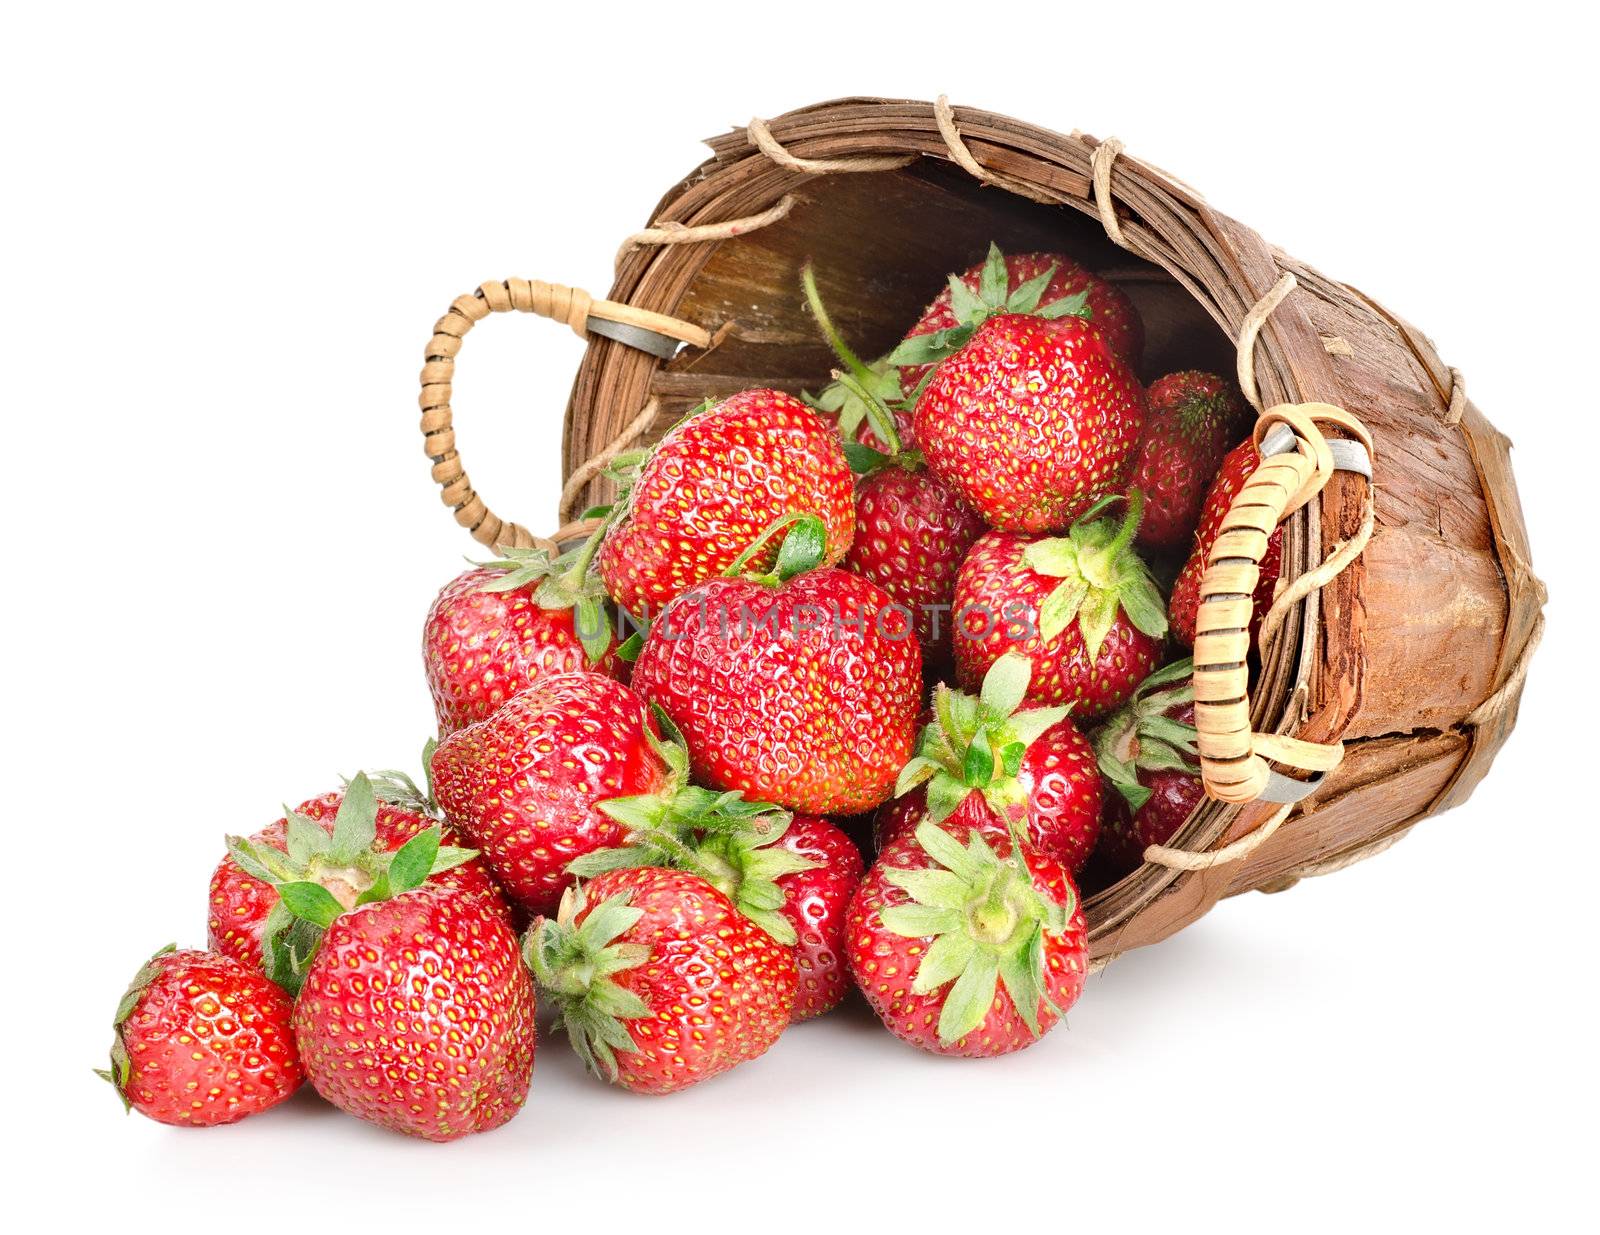 Strawberries and basket by Givaga